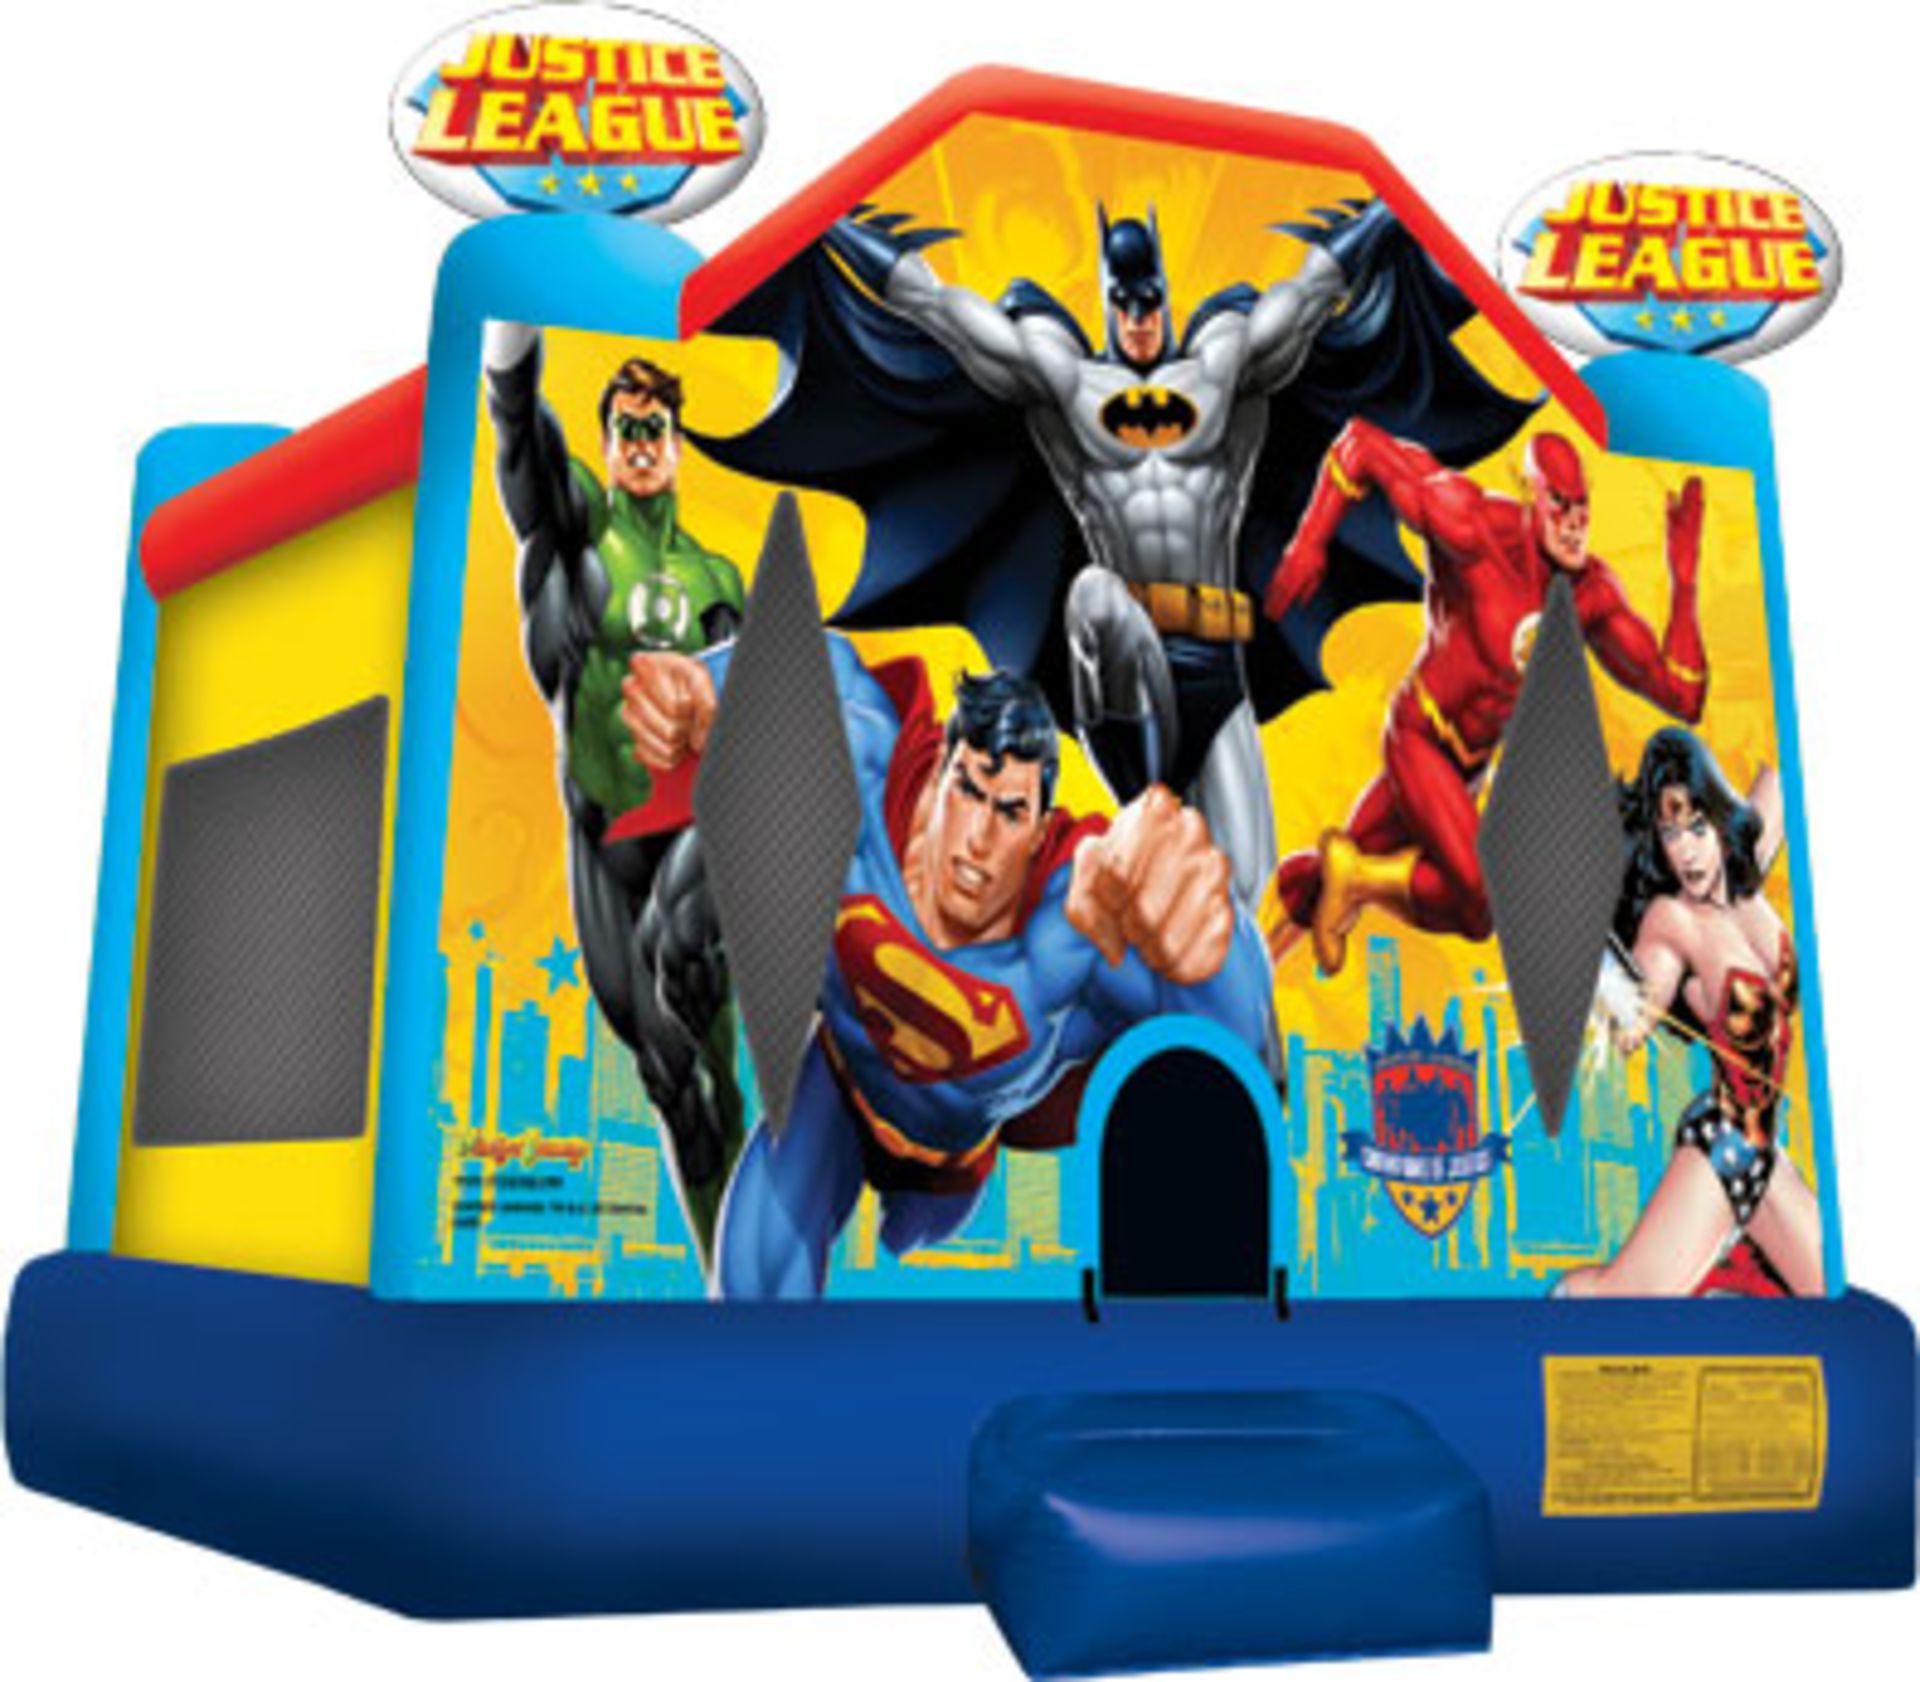 Justice League Jumper, 14' x 13' x 12' - Image 2 of 2